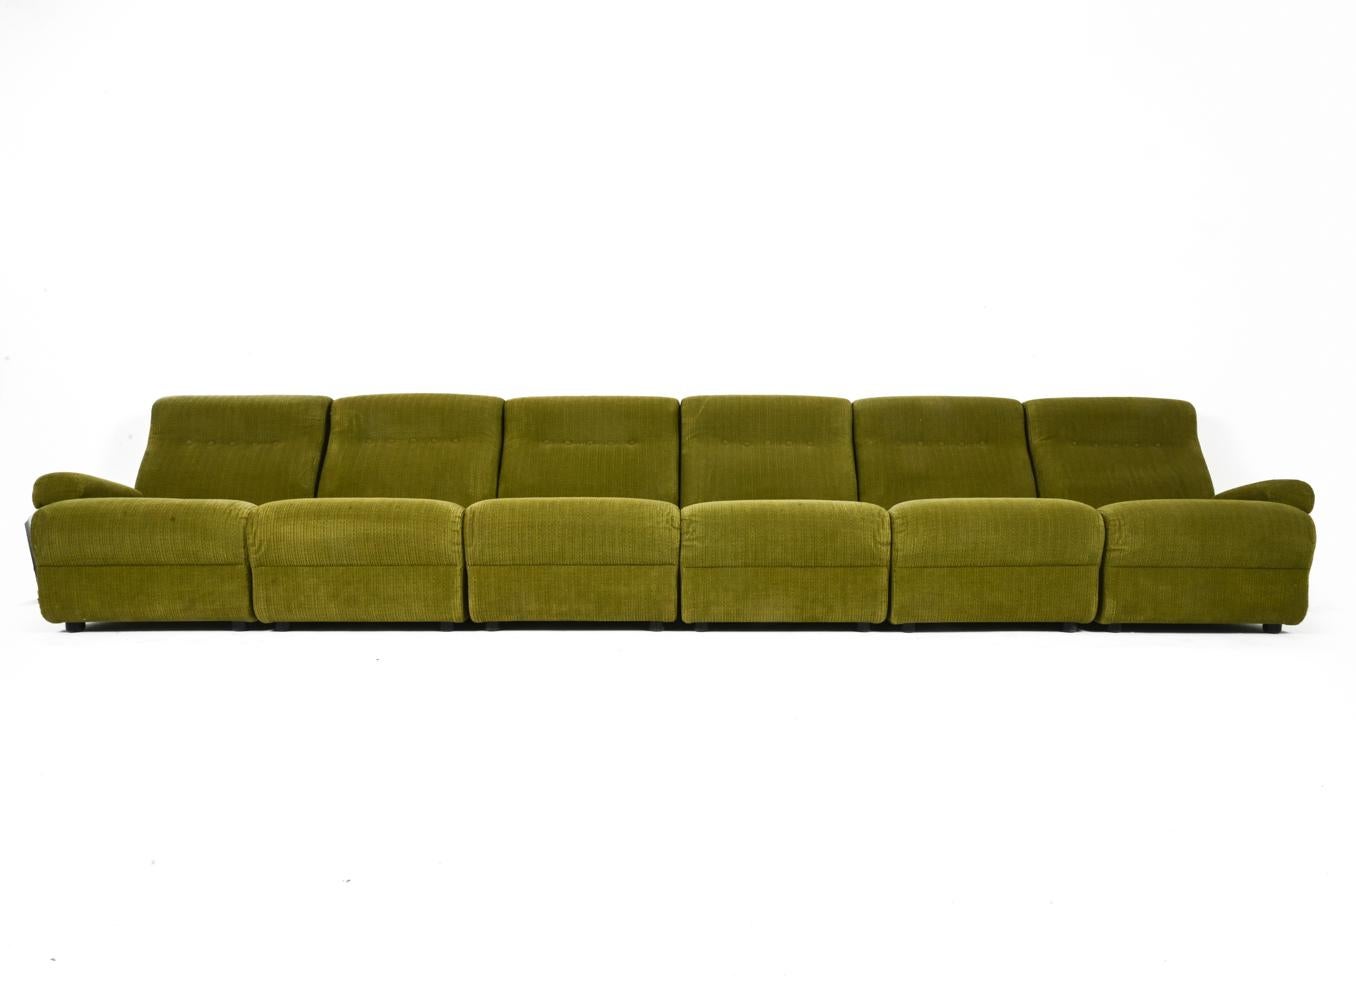 Turn your living space into a retro-futuristic installation with this fabulous Space Age modular sofa. The chunky, plinth-style silhouette is pure 1970's fun; with four armless sections and two single-arm endpieces, you are free to craft the perfect